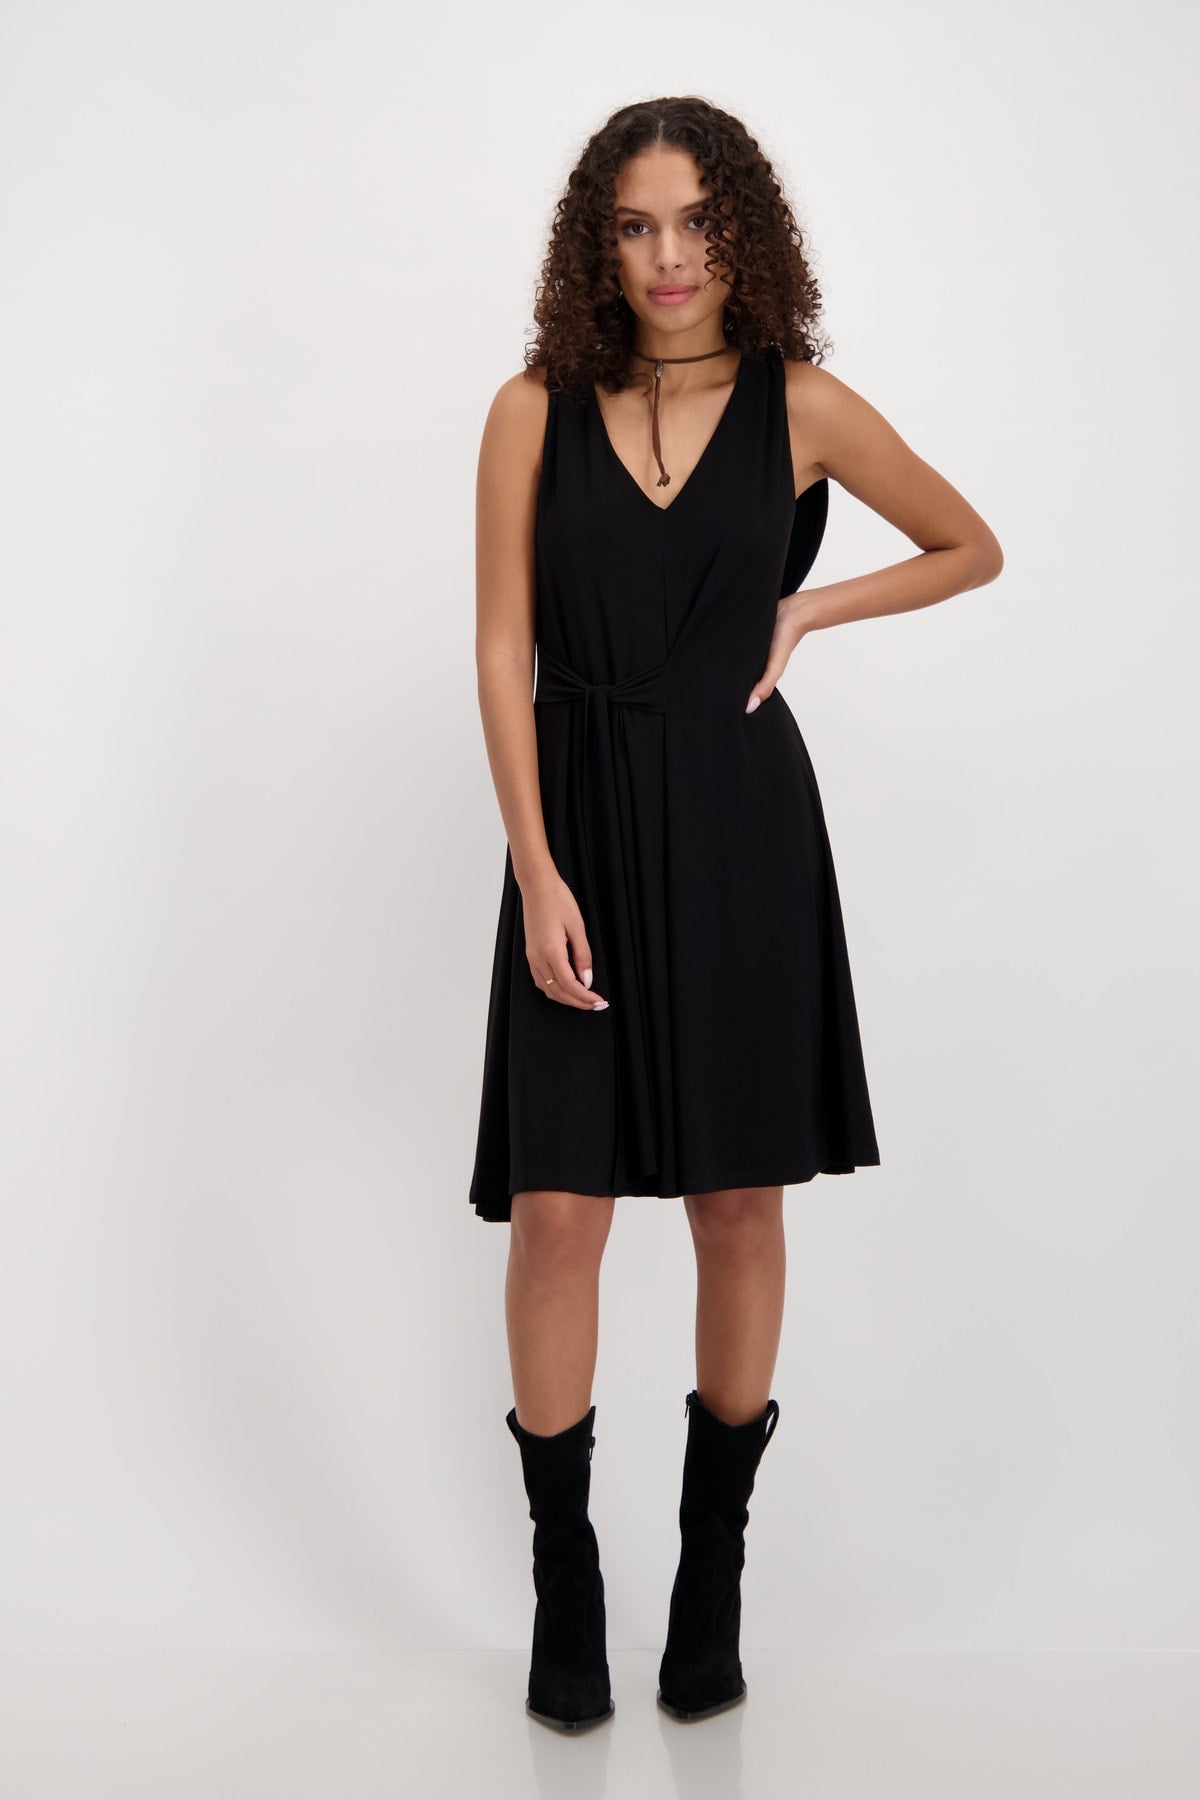 Monari Elastic Dress – The Accessories Clothing and One Shoes, Only 